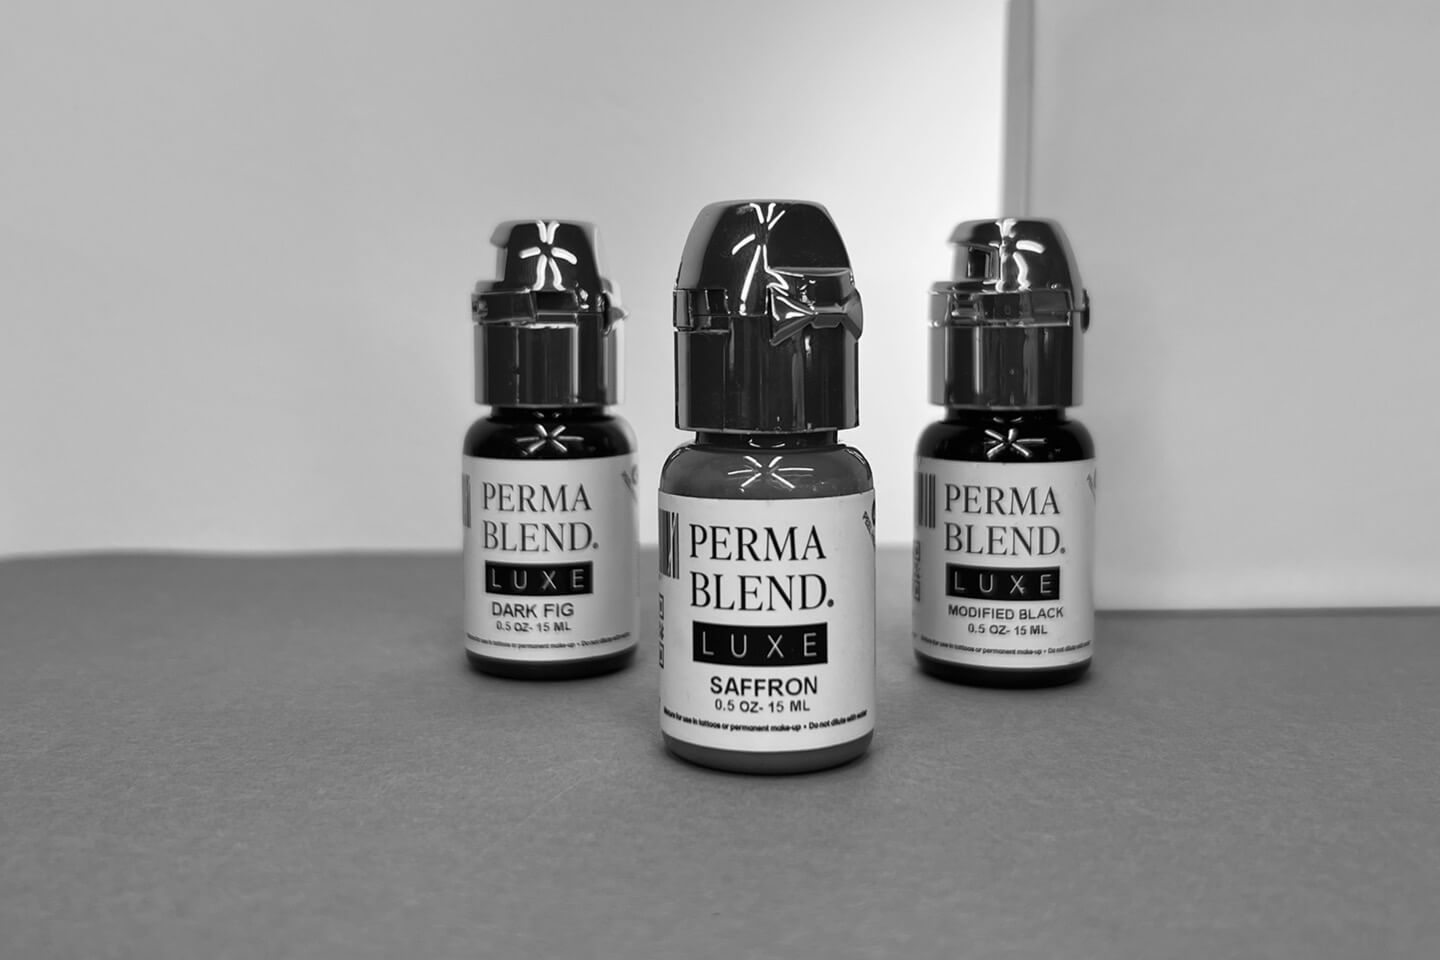 Perma Blend LUXE